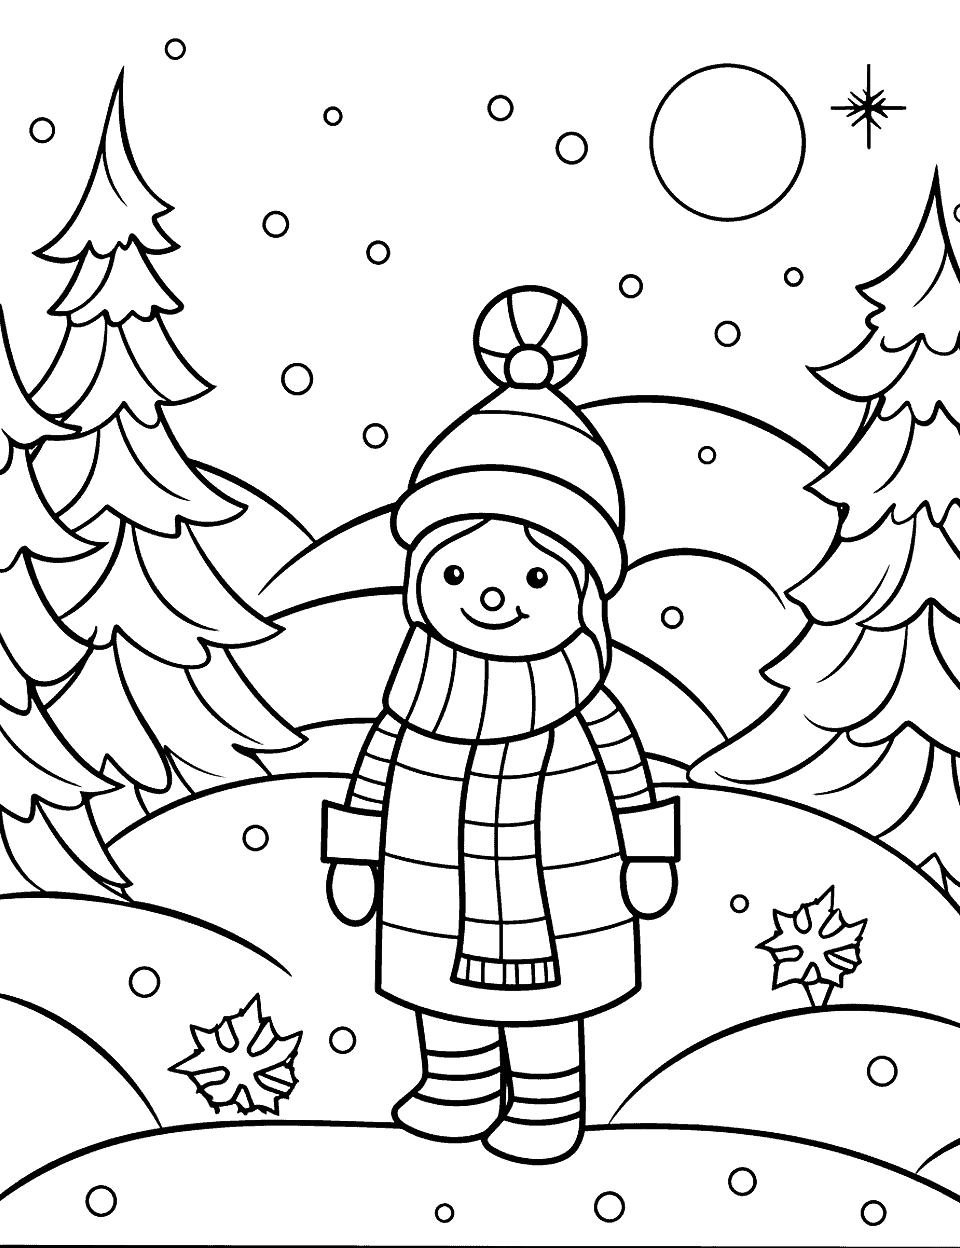 Winter Themed Art Coloring Page - A winter-themed scene to color featuring a warmly dressed girl standing in the snow.